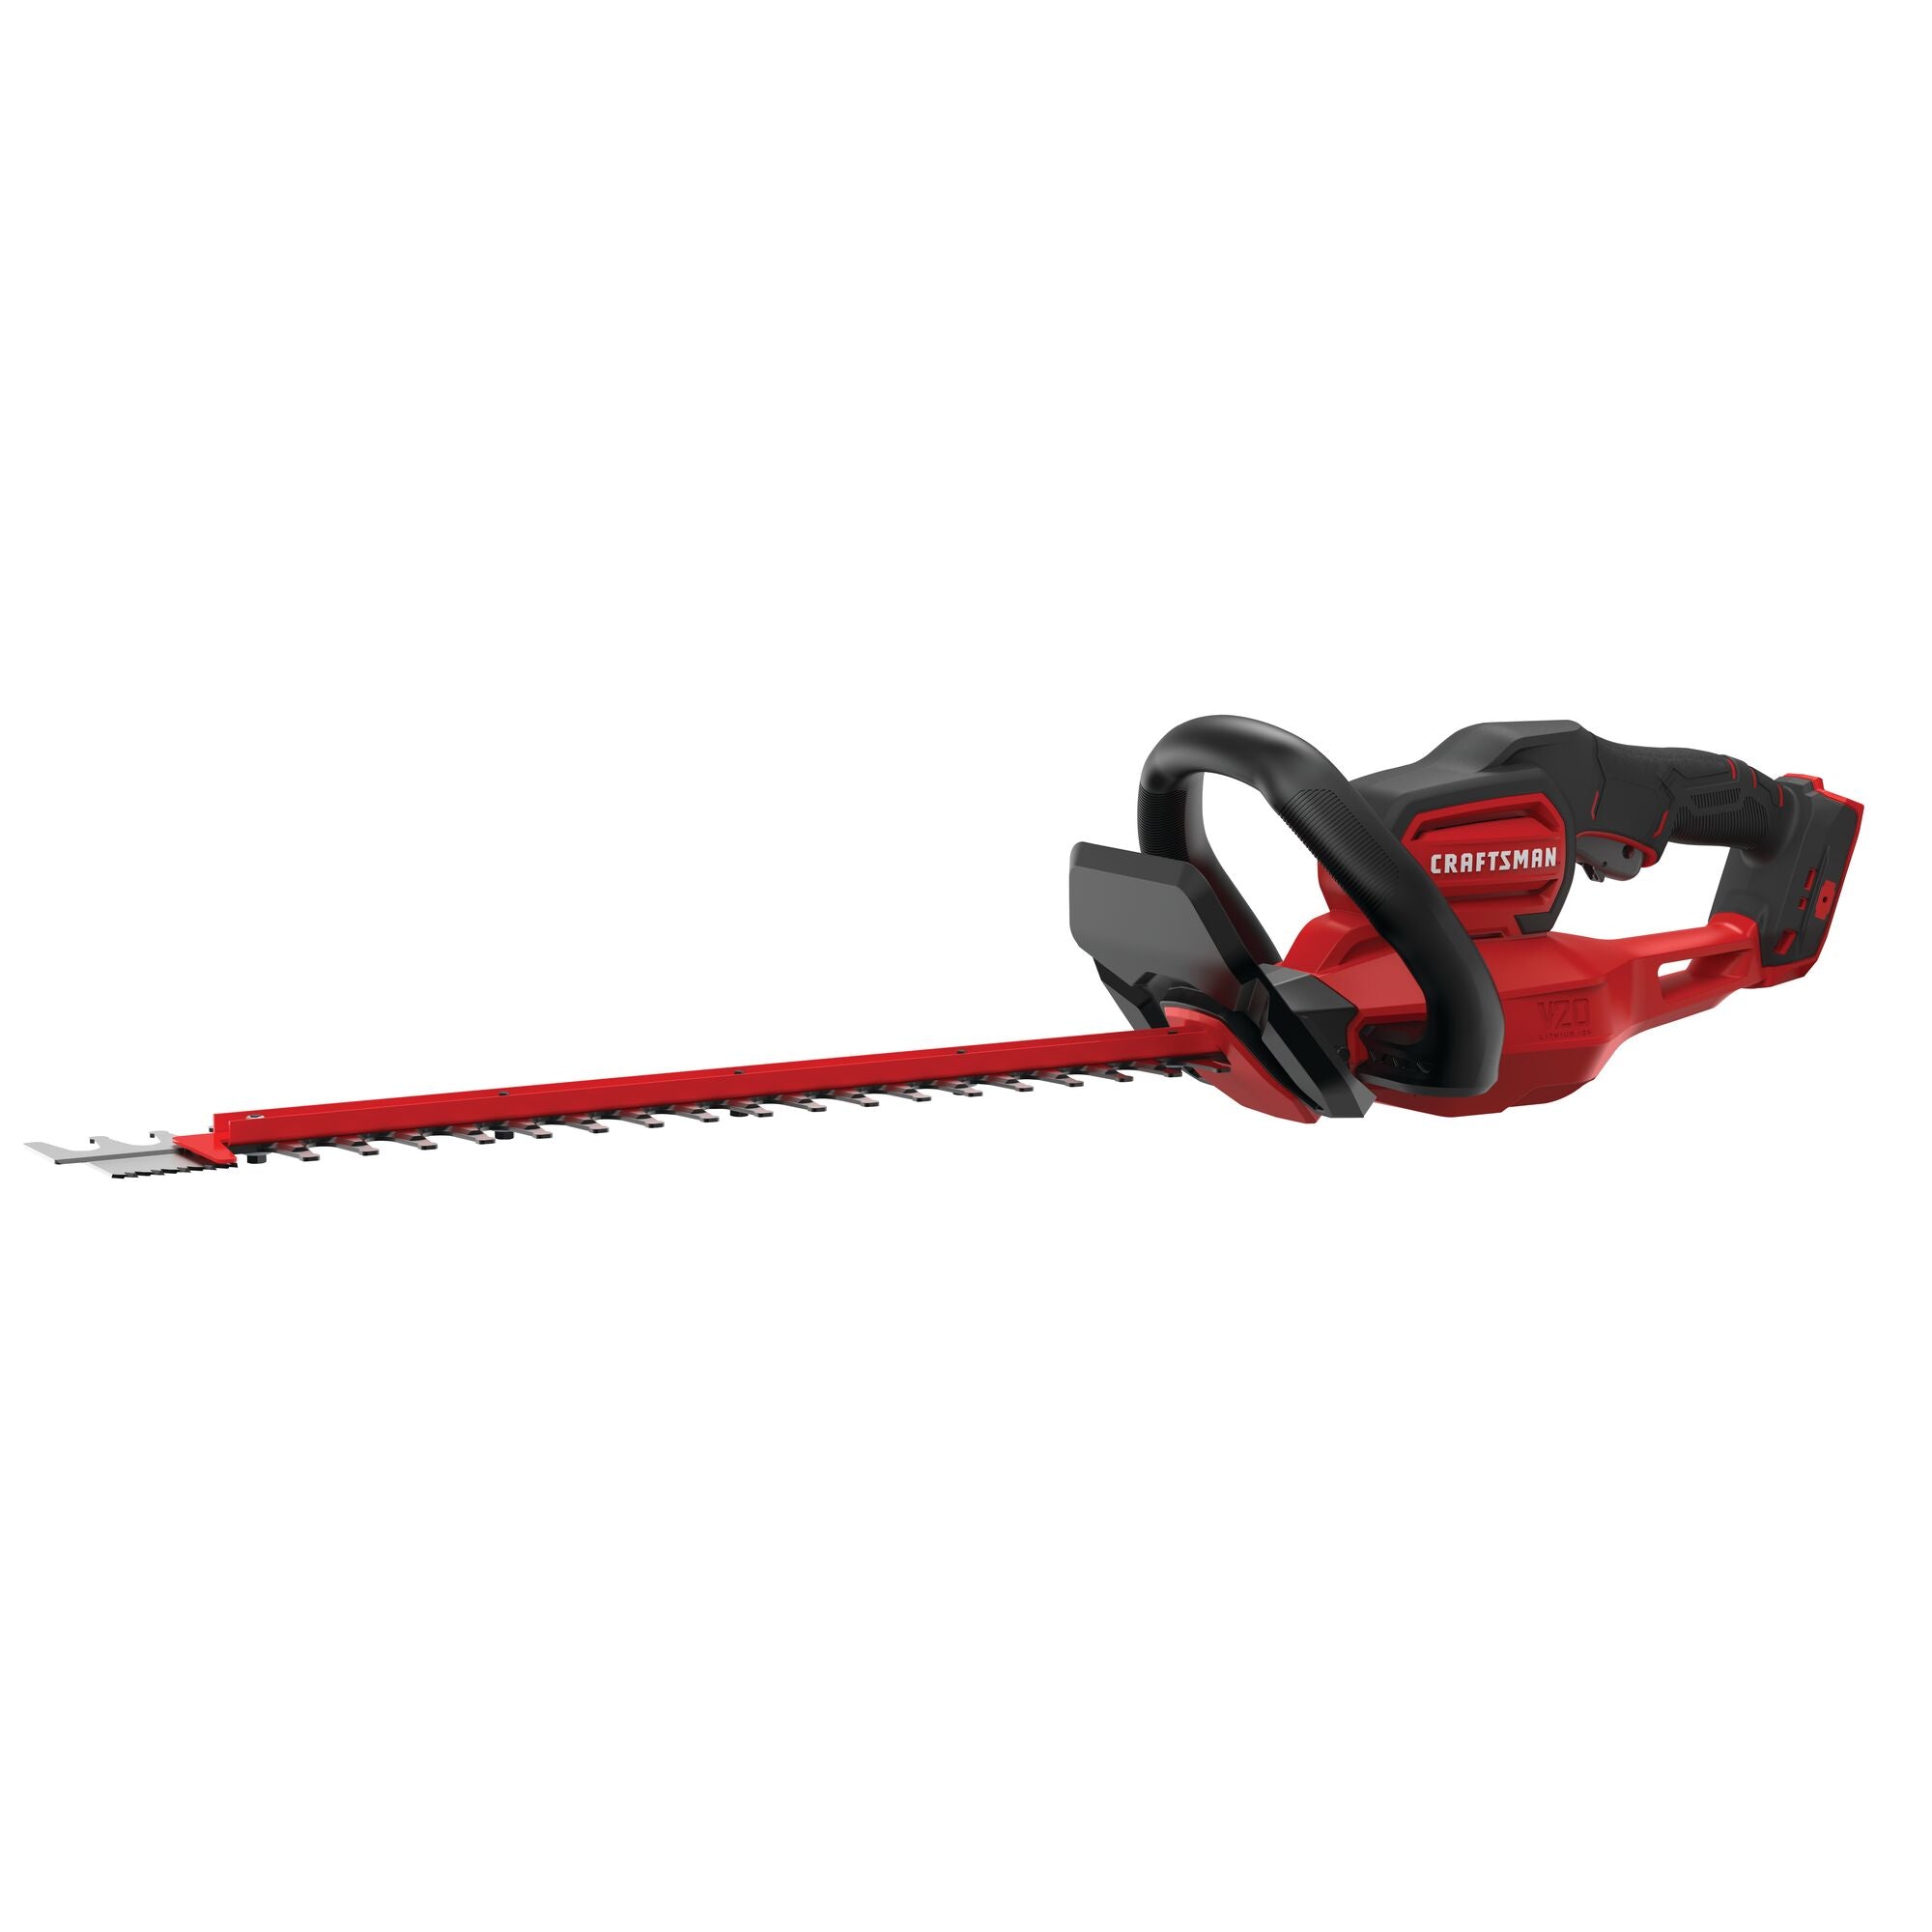 BLACK+DECKER 20V MAX Cordless Hedge Trimmer, 22-Inch, Tool Only